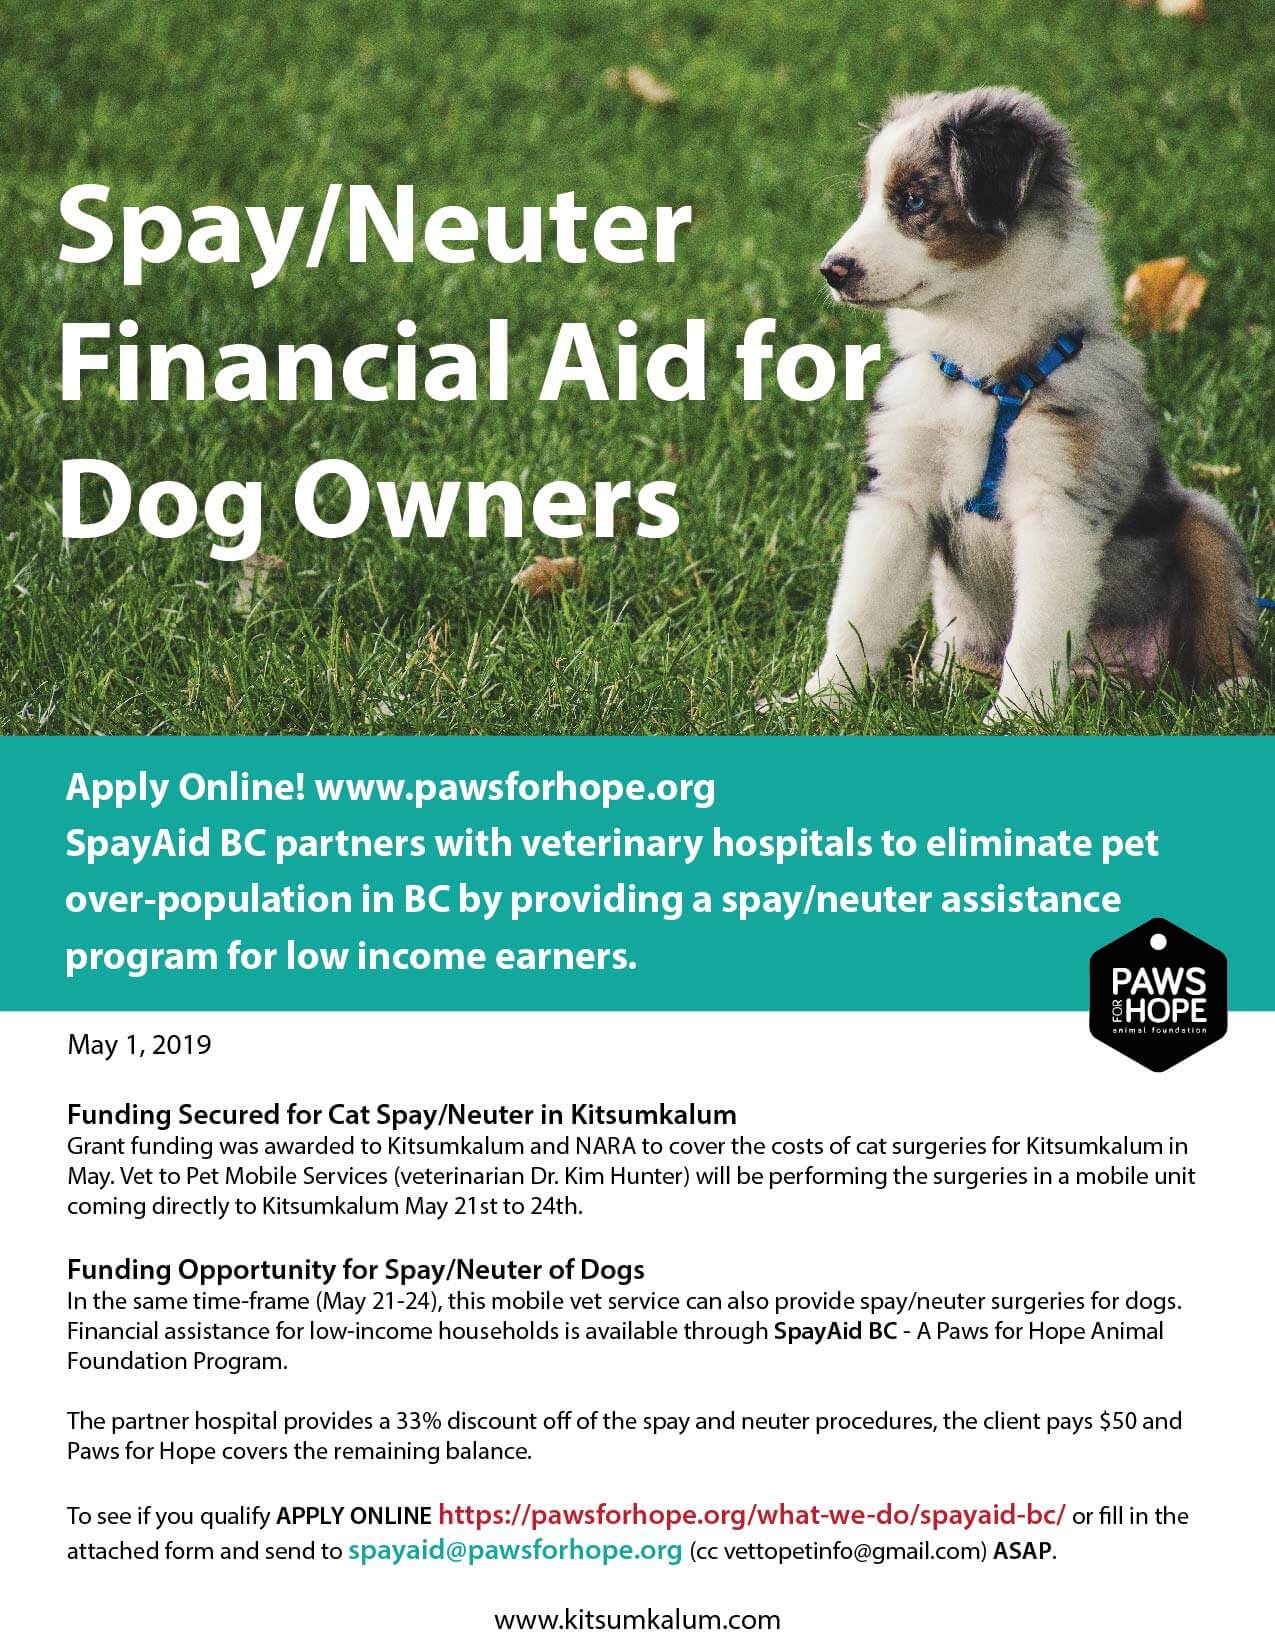 Spay and Neuter Financial Aid for Dog Owners - Kitsumkalum, a Galts'ap  (community) of the Tsimshian Nation